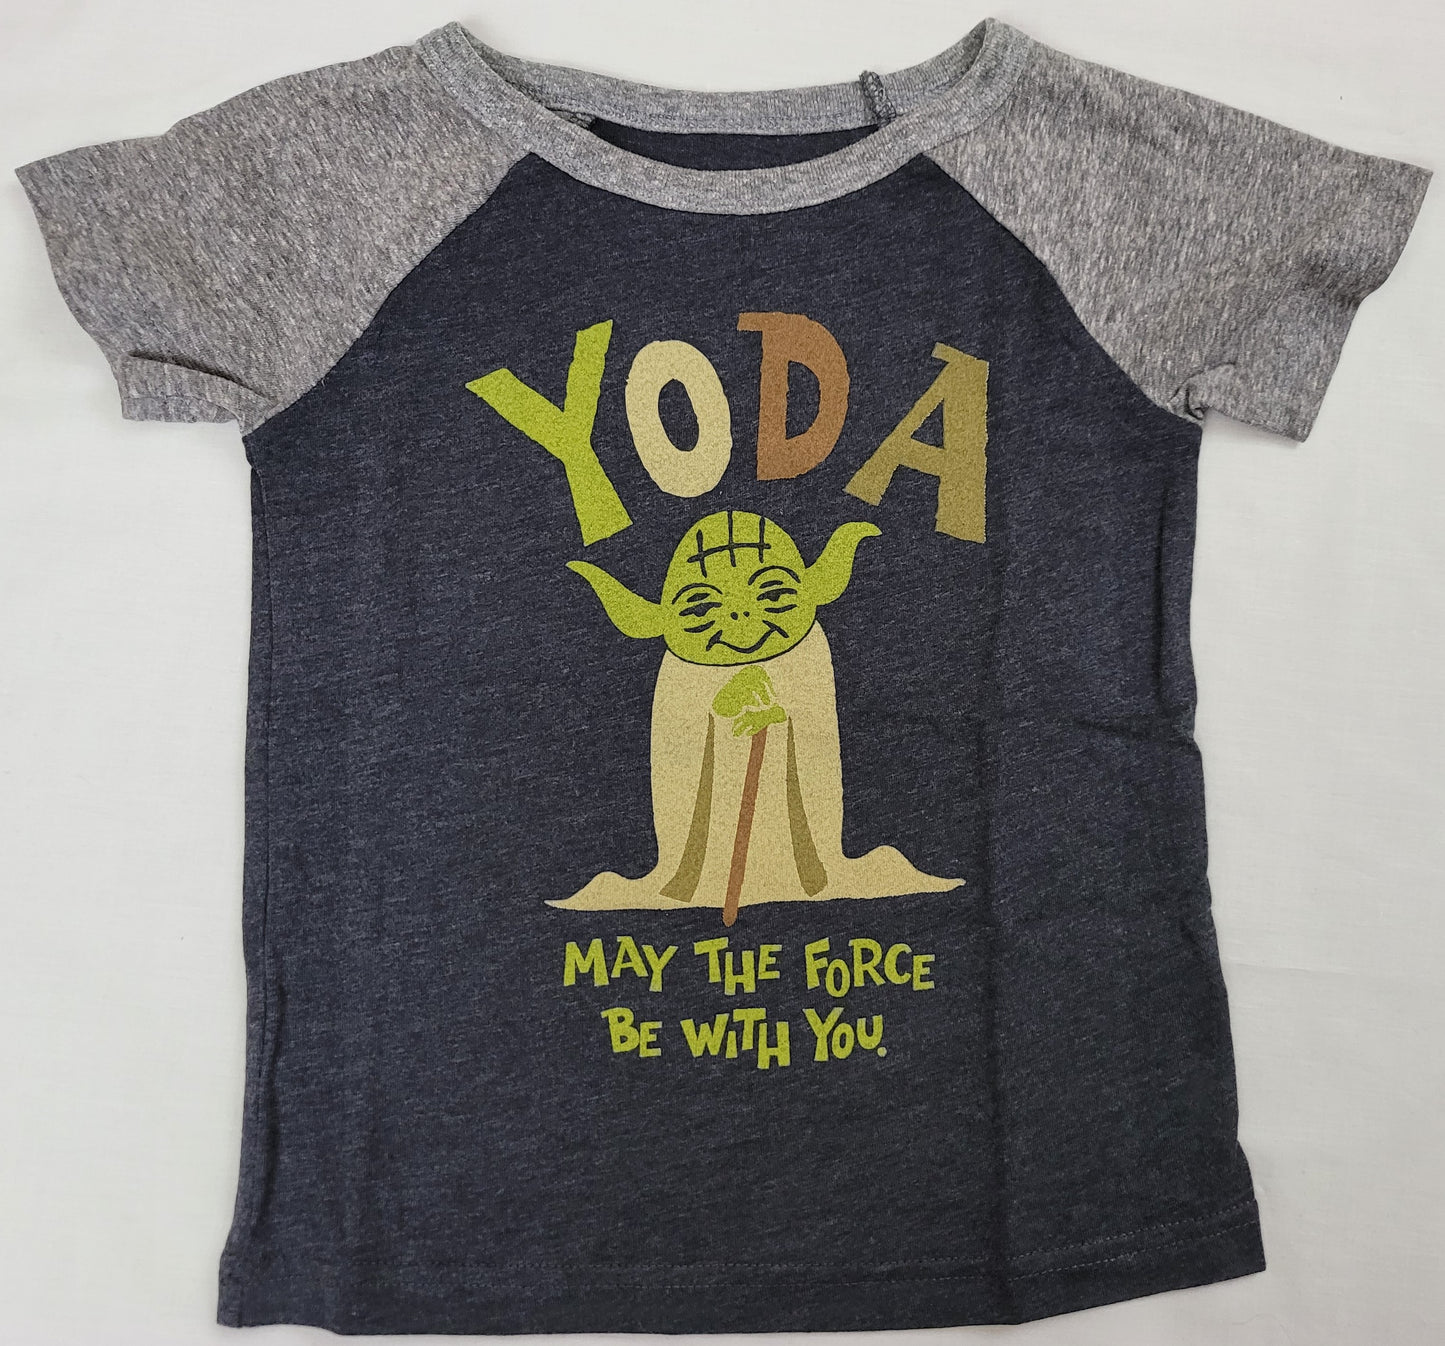 Yoda May The Force Be With You Star Wars Boys T-Shirt 2T 3T 4T 5T